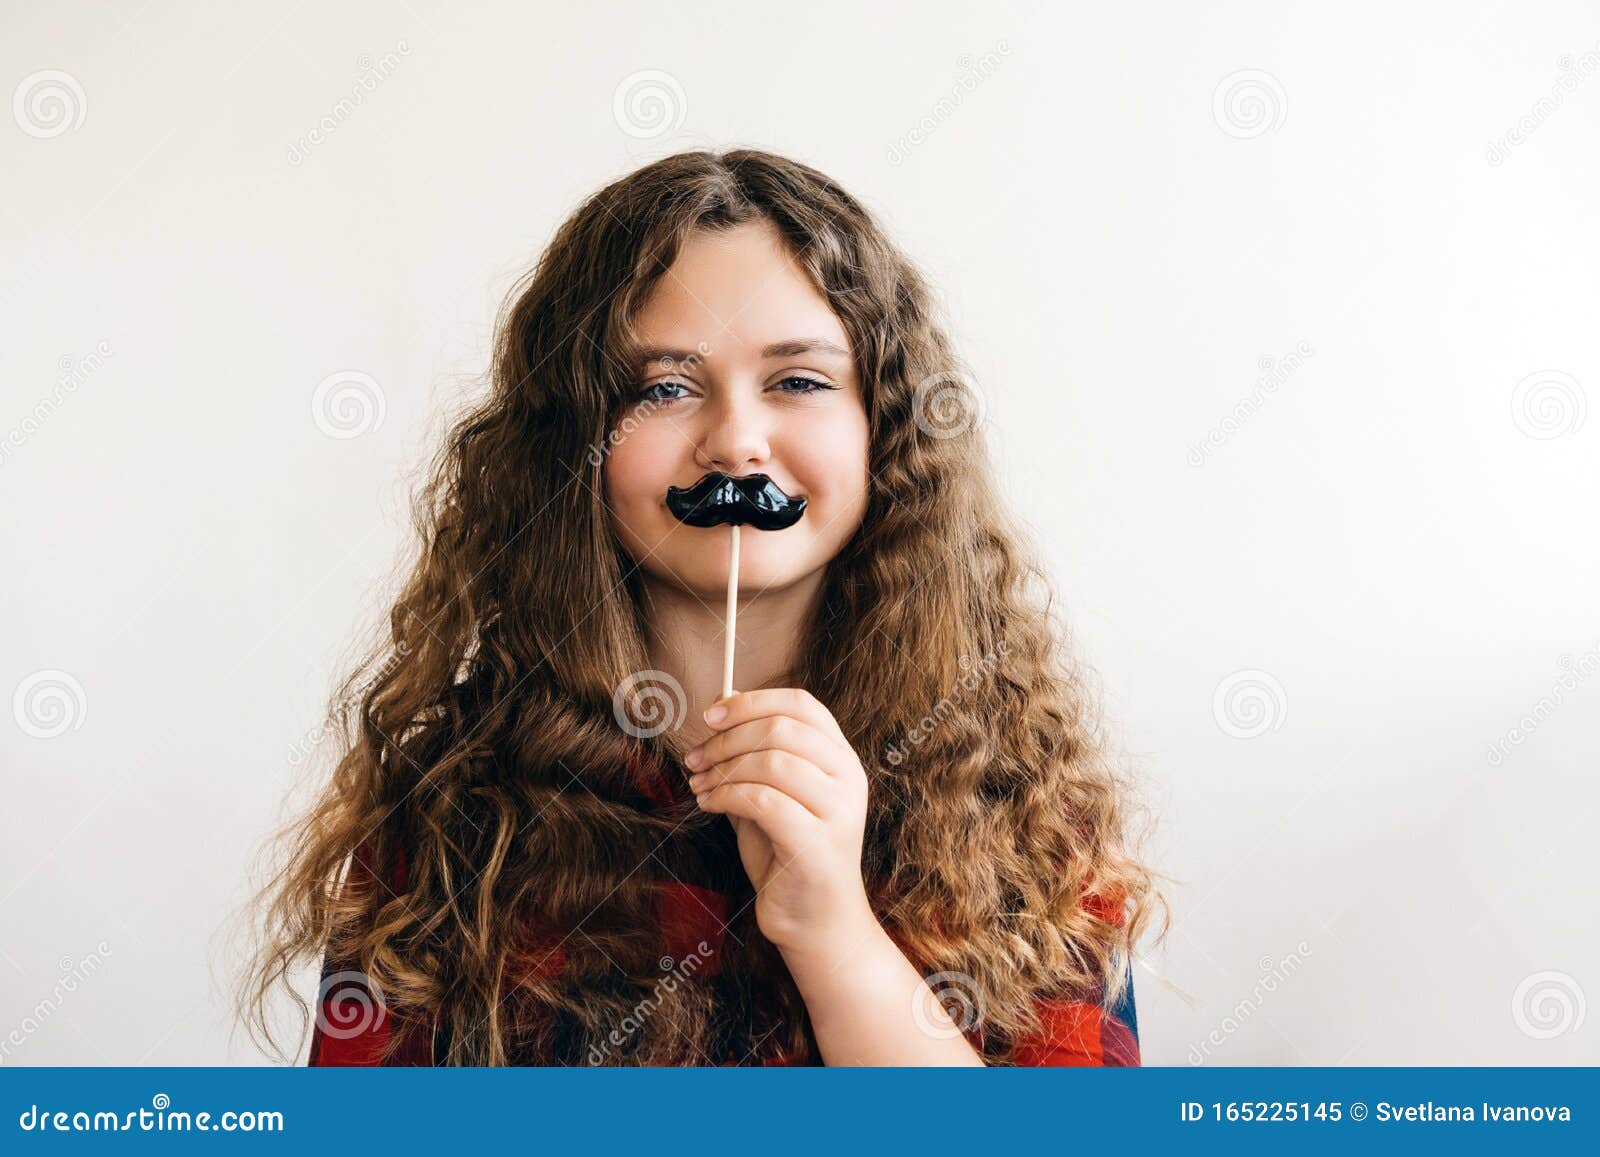 Cute Curly Longhaired Blonde Teen Girl Holding I